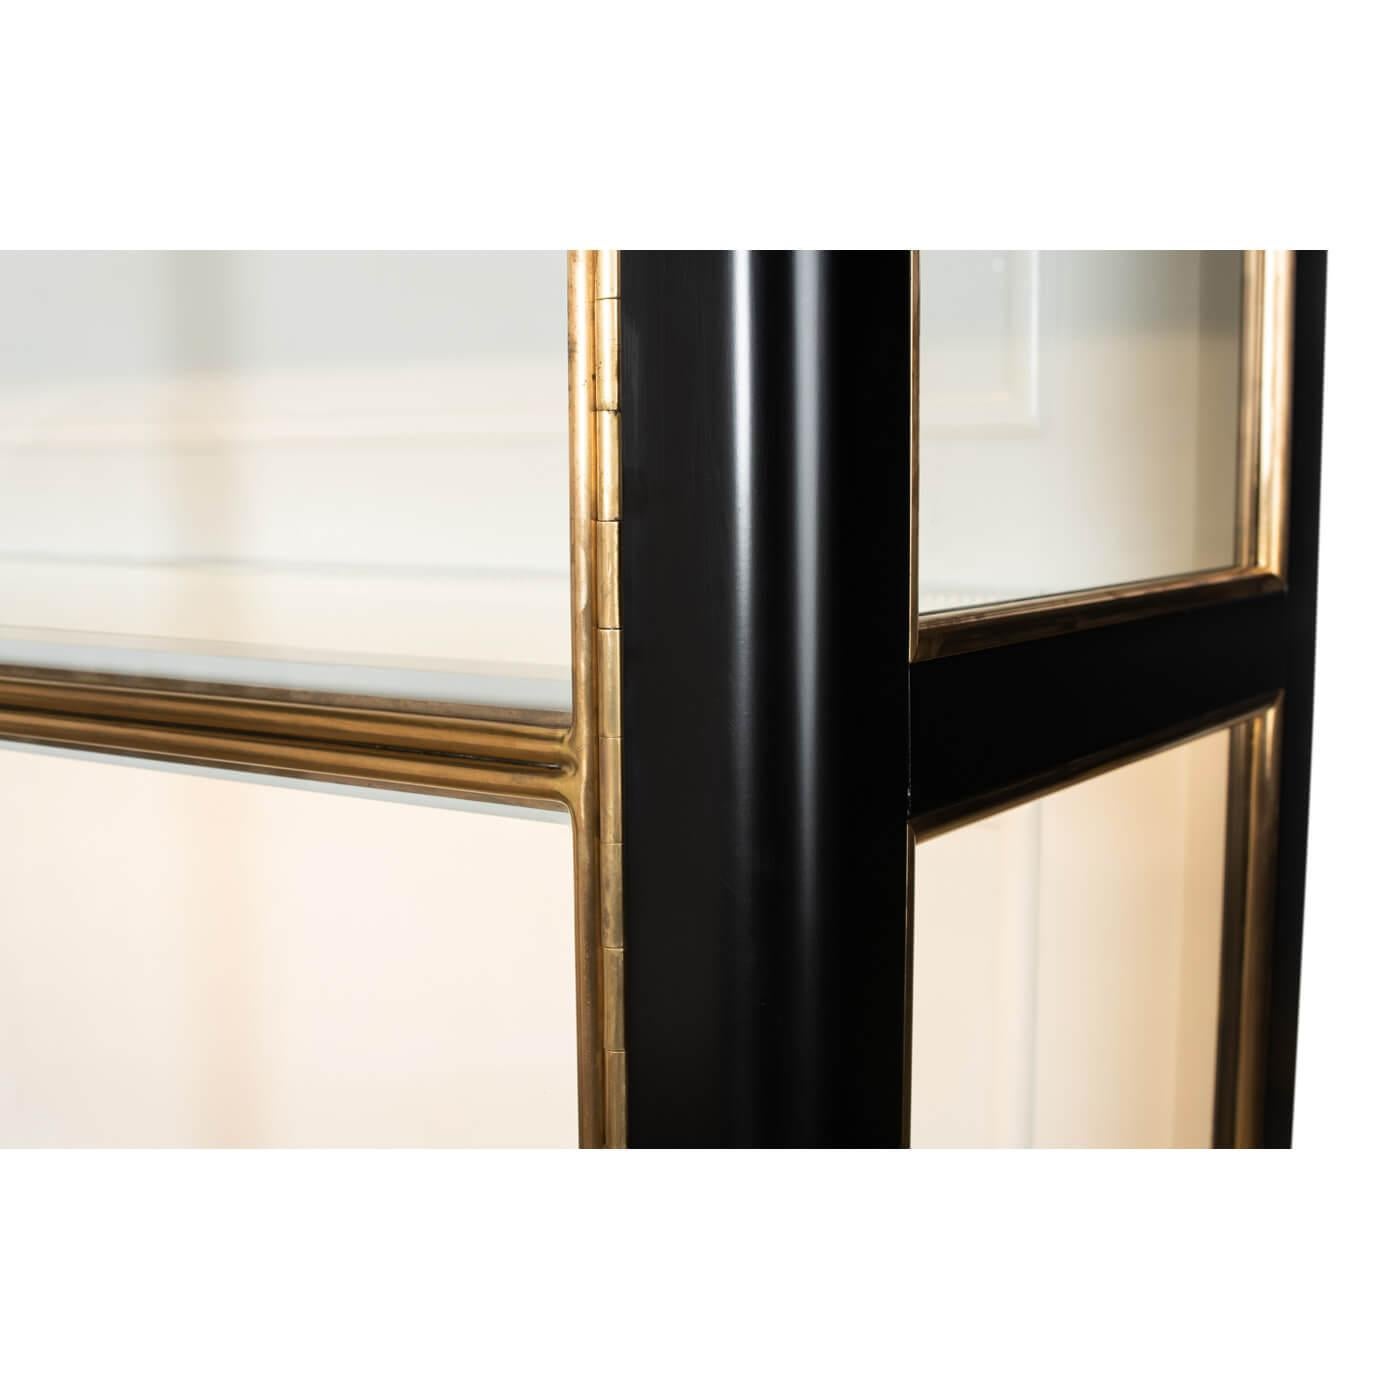 Neoclassical Modern Ebonized Glass Door Bookcase For Sale